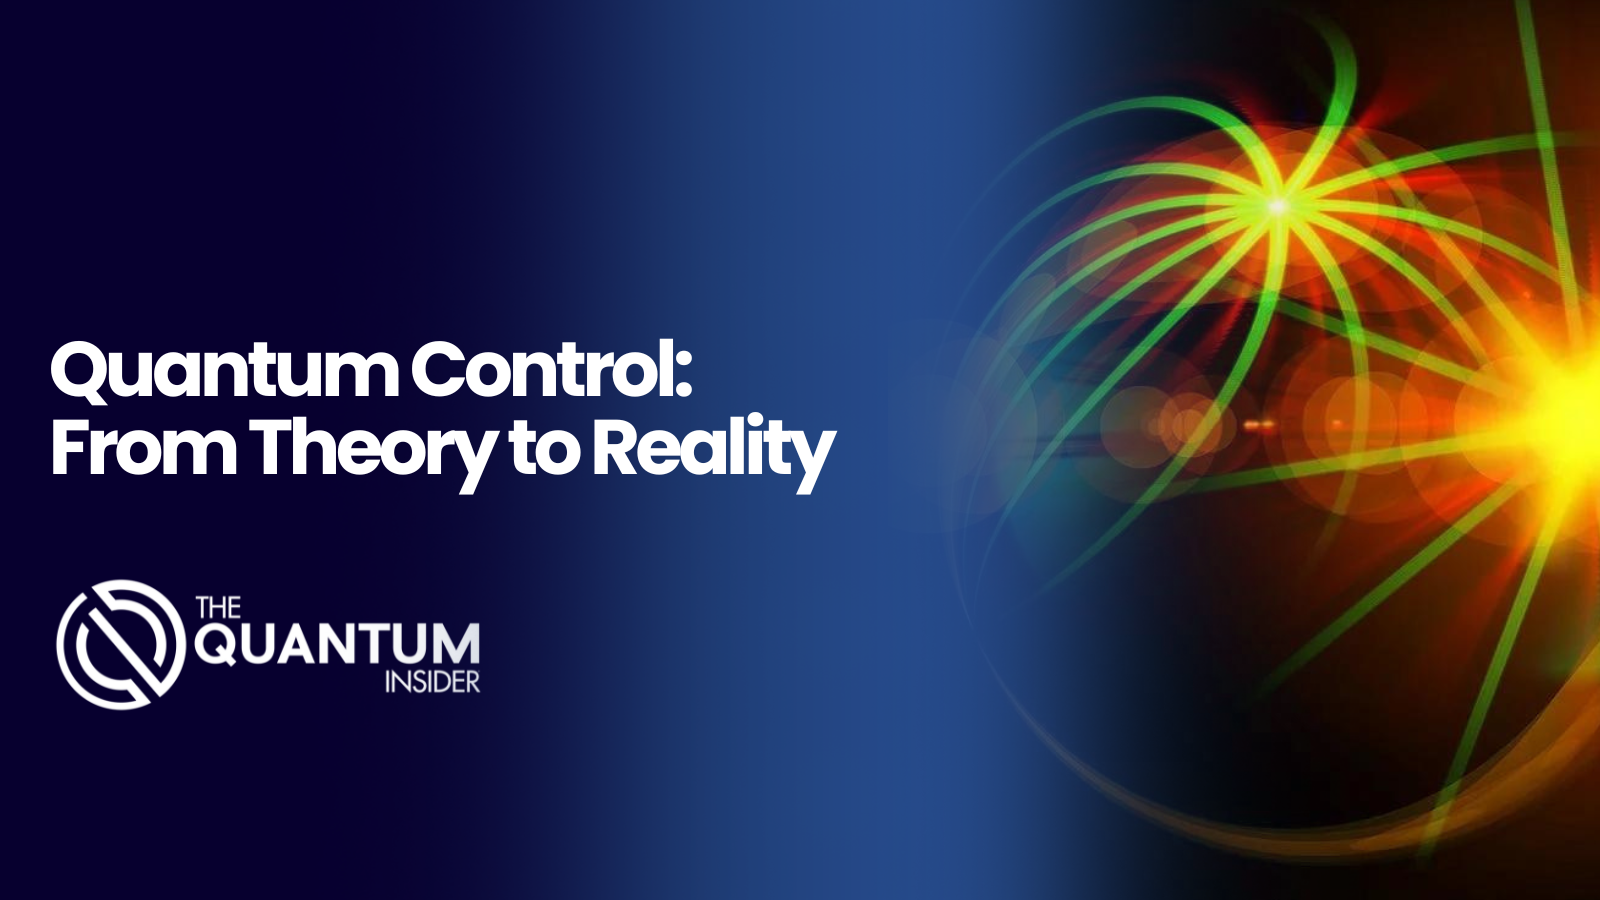 Quantum Control: From Theory to Reality